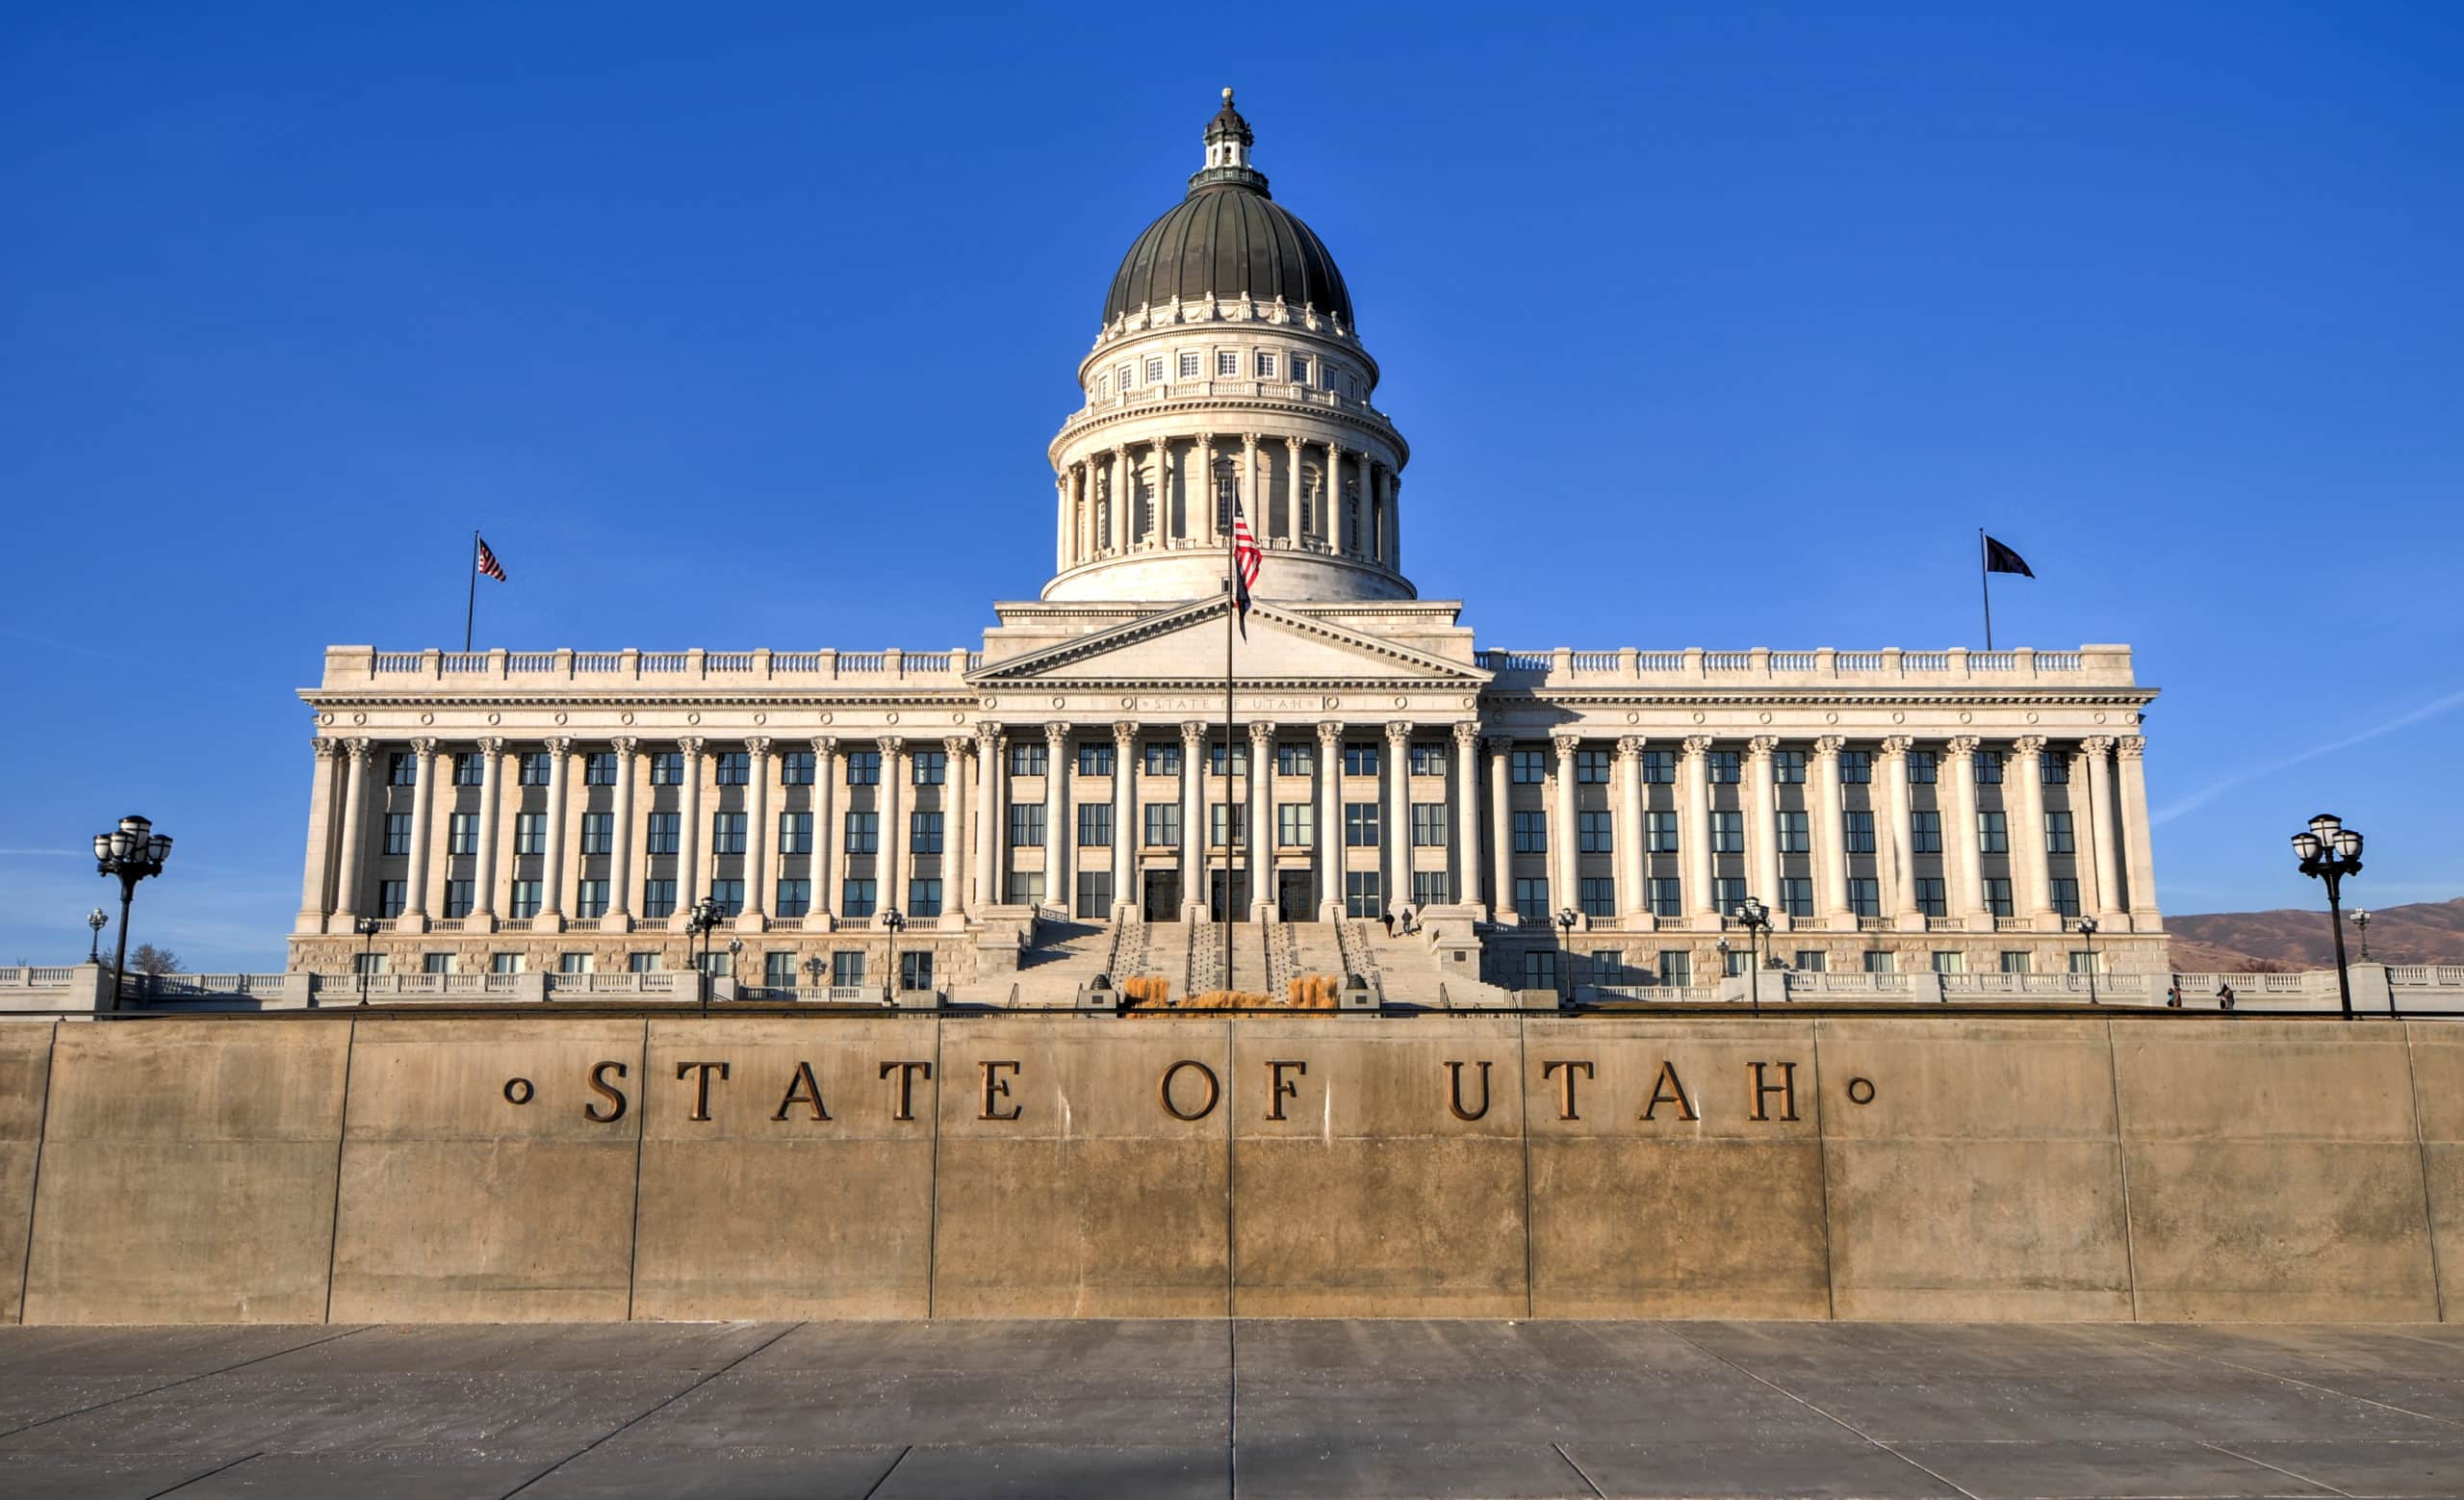 State Capitol Building in Salt Lake City, Utah. The building houses the chambers of the Utah State Legislature, the offices of the Governor and Lieutenant Governor of Utah.